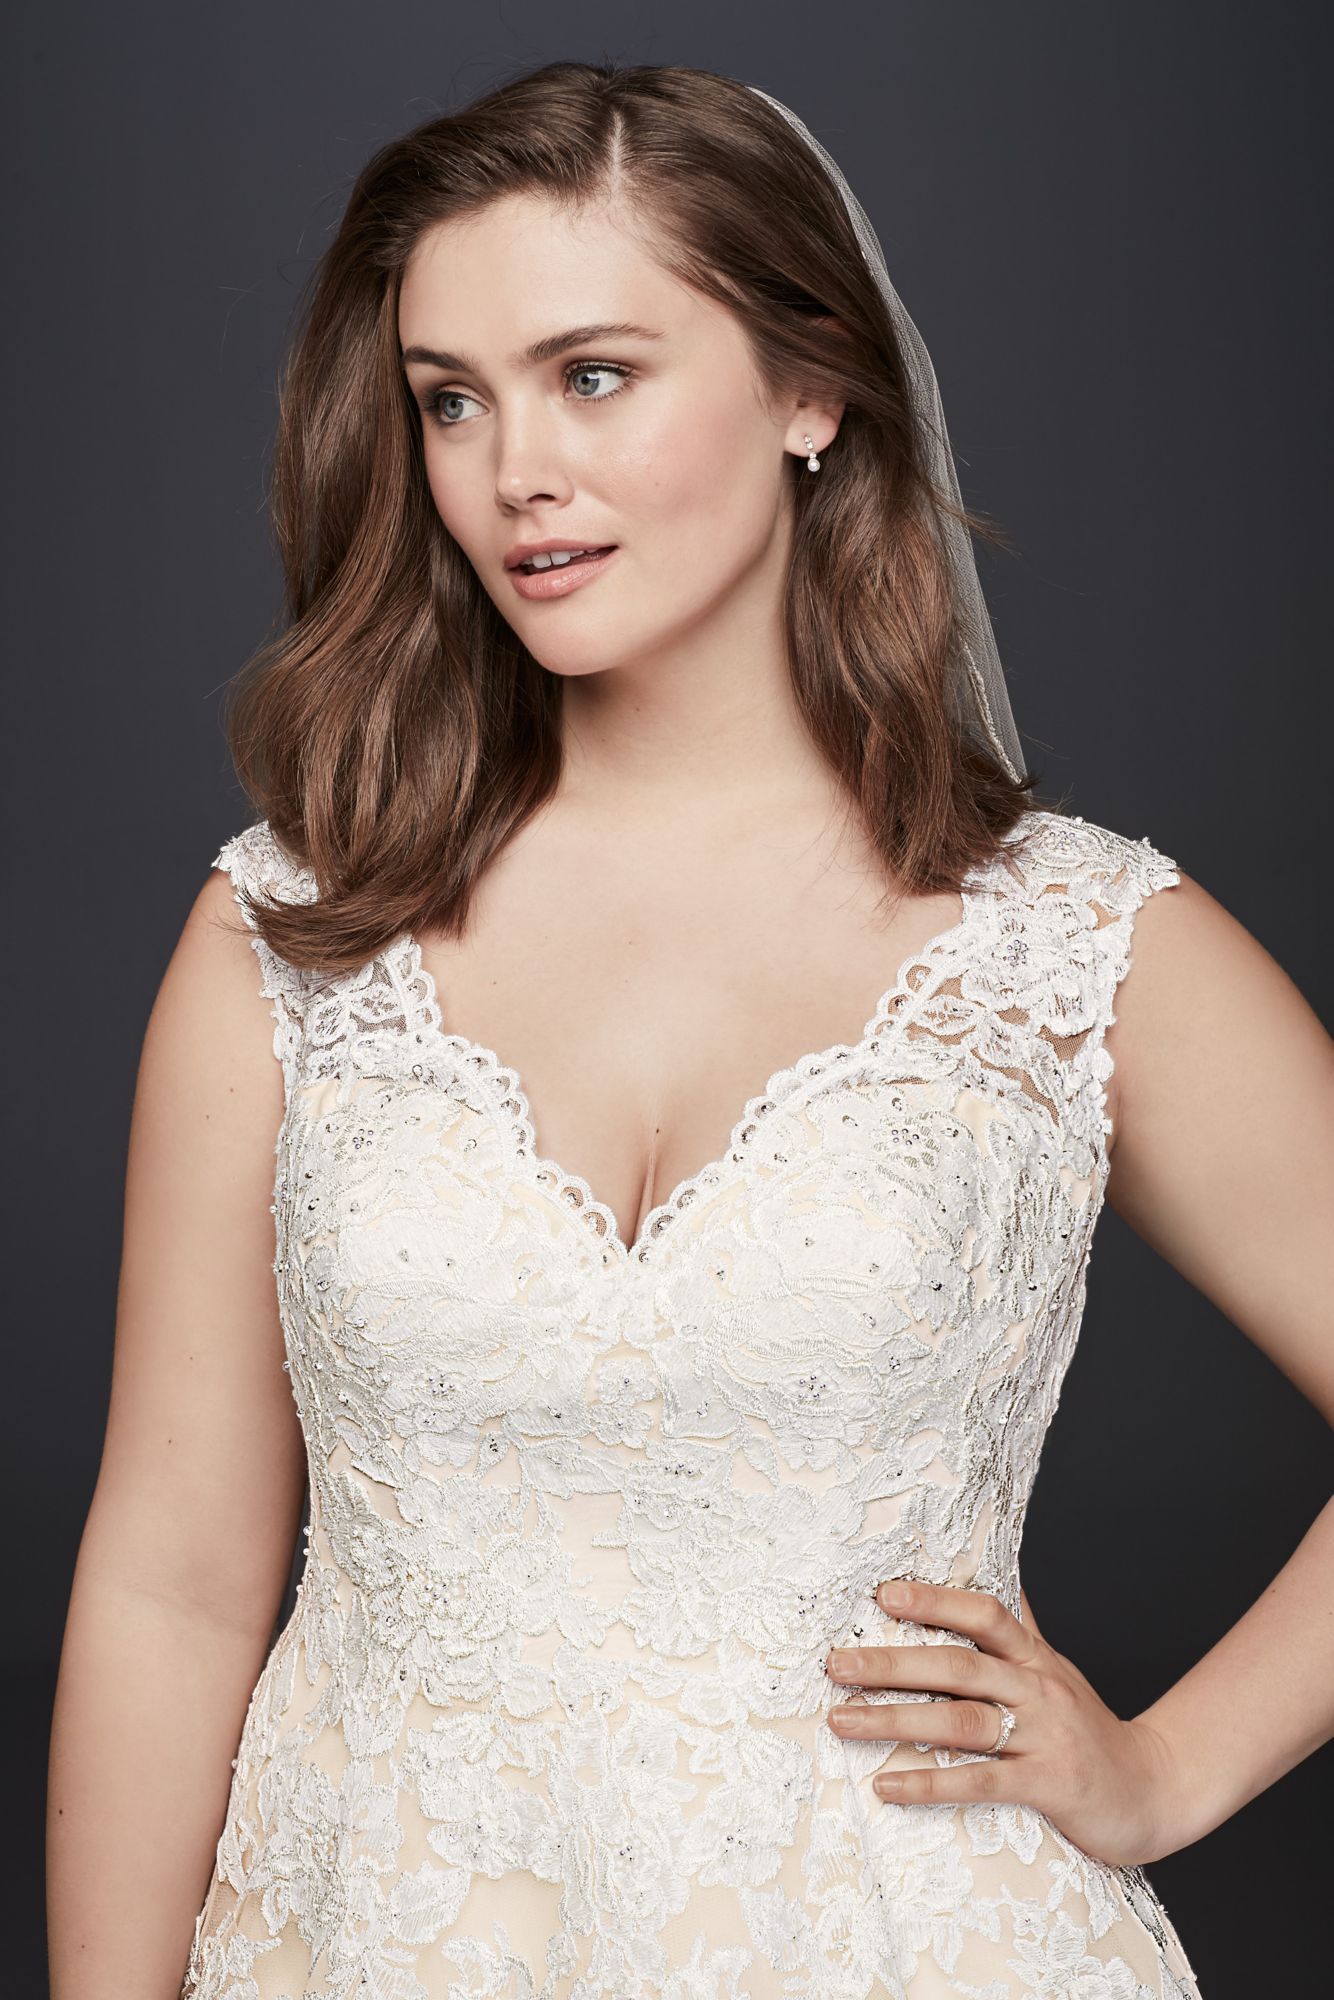 Scalloped Lace and Tulle Petite 7WG3850 Wedding Dress